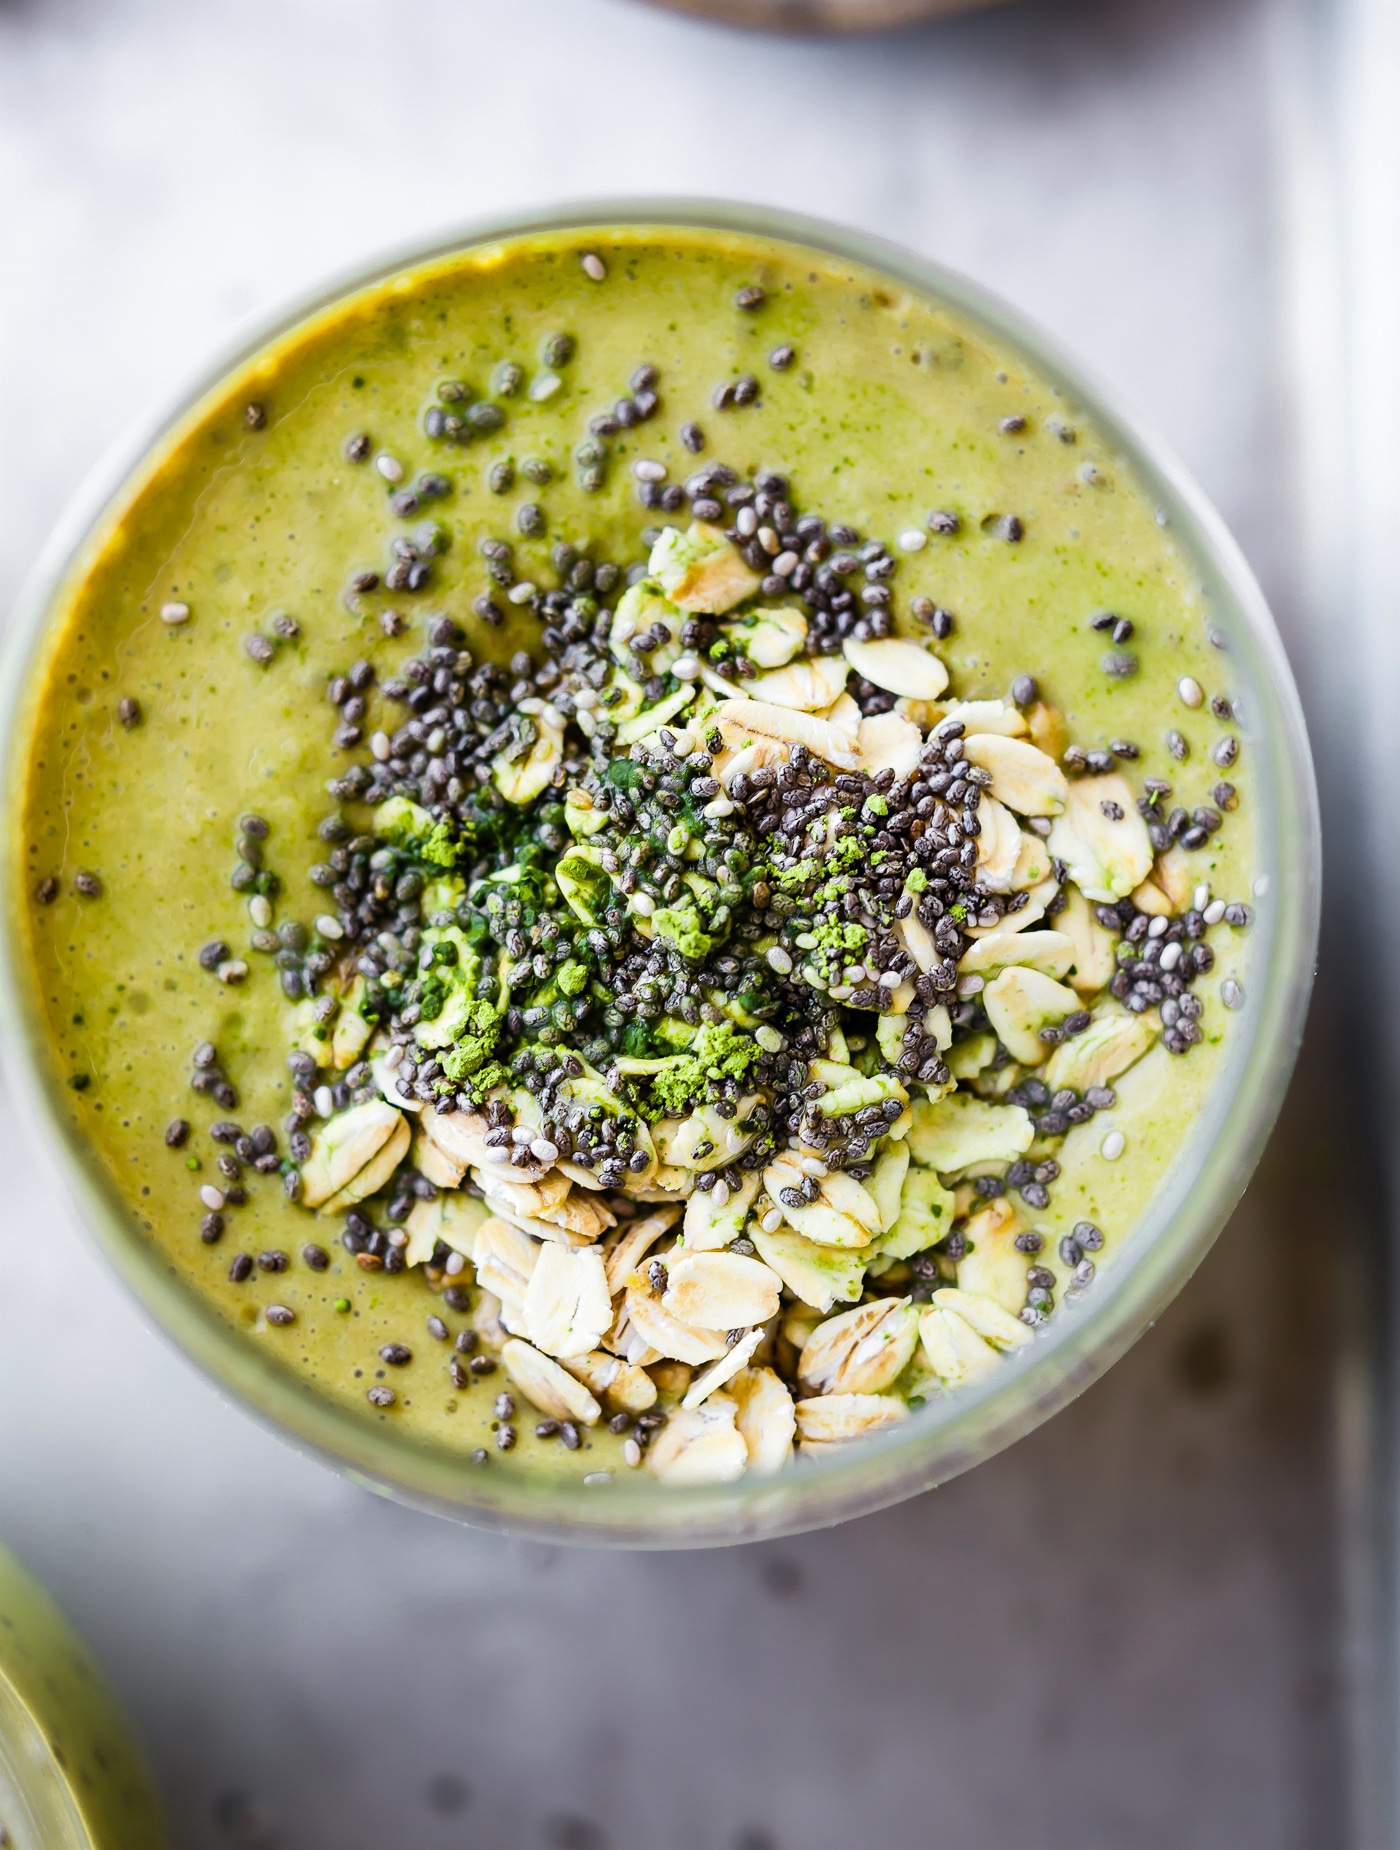 This Chia Matcha Overnight Breakfast Smoothie is a great way to start the day! An energizing Make ahead smoothie packed with antioxidants, fiber, and probiotics! Just blend it up that green goodness the night before and enjoy the next morning.